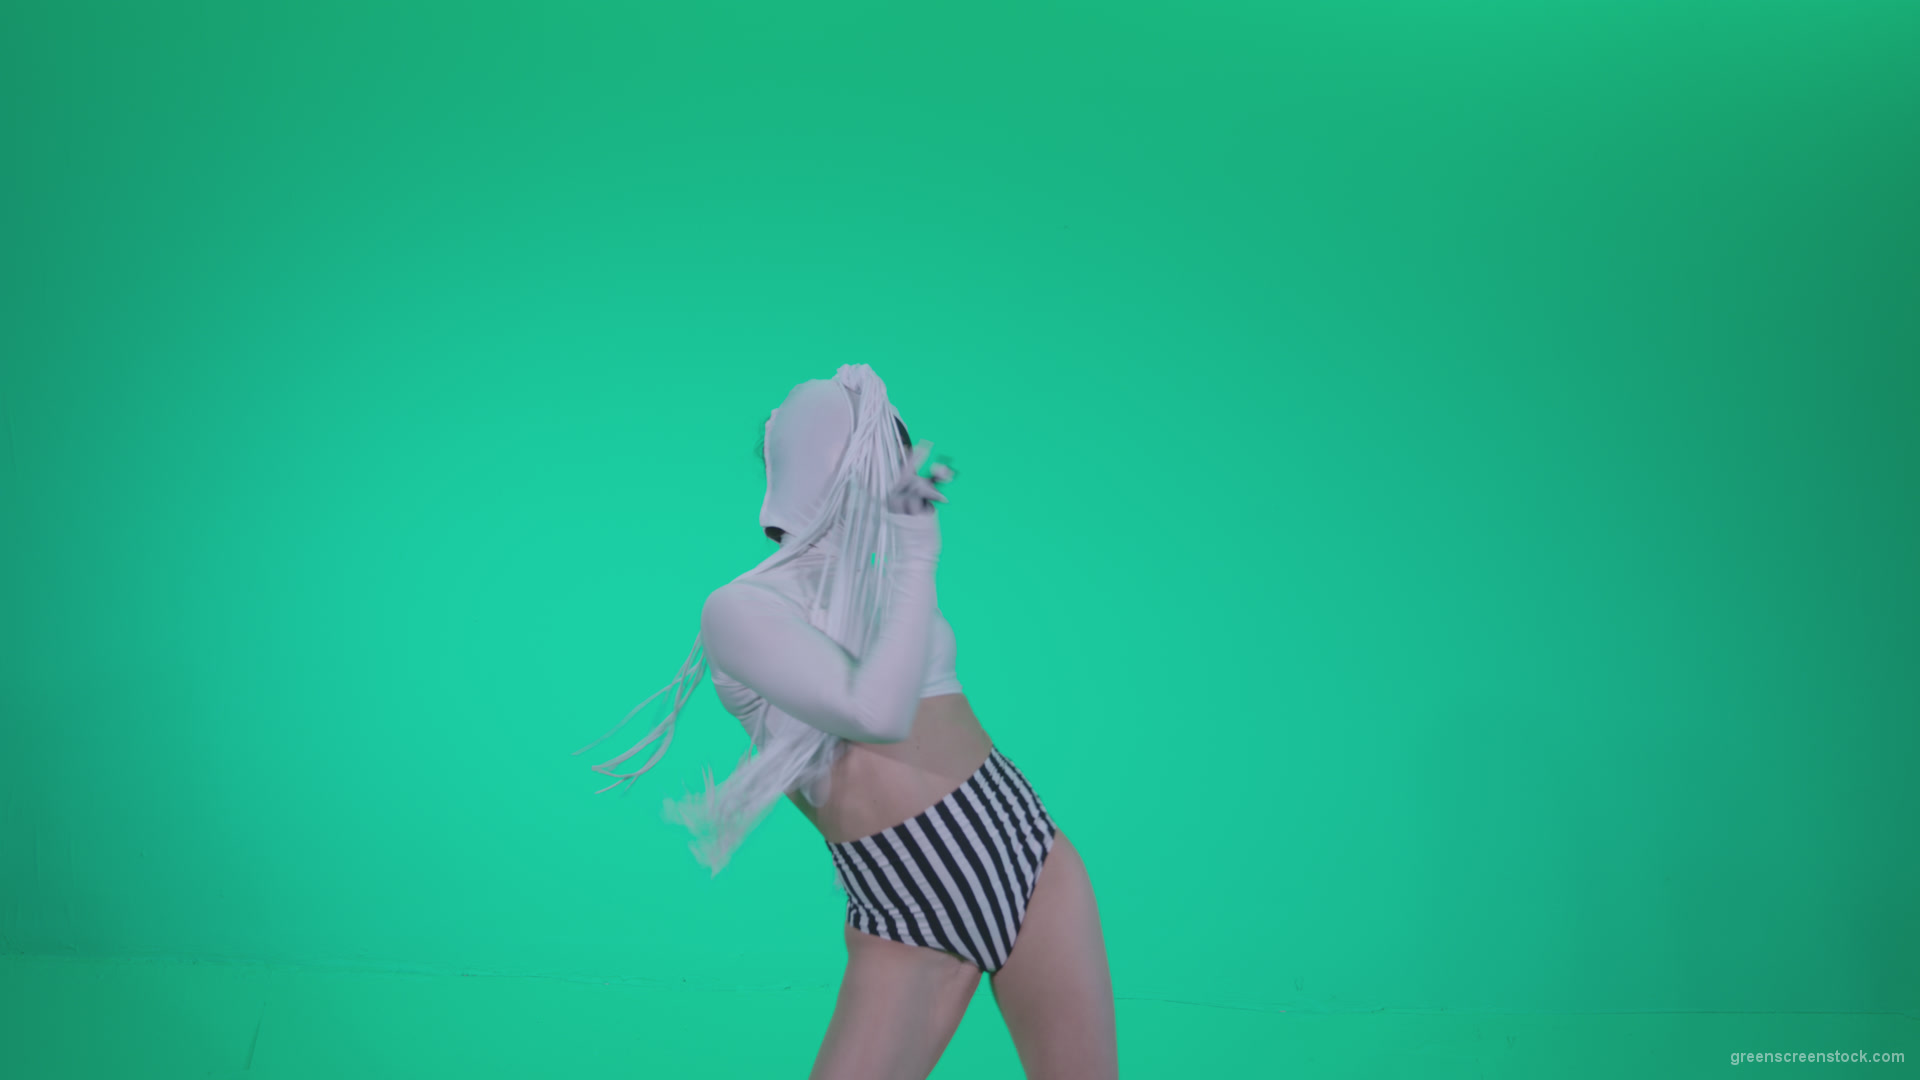 Go-go-Dancer-with-Latex-Top-t11-Green-Screen-Video-Footage_007 Green Screen Stock